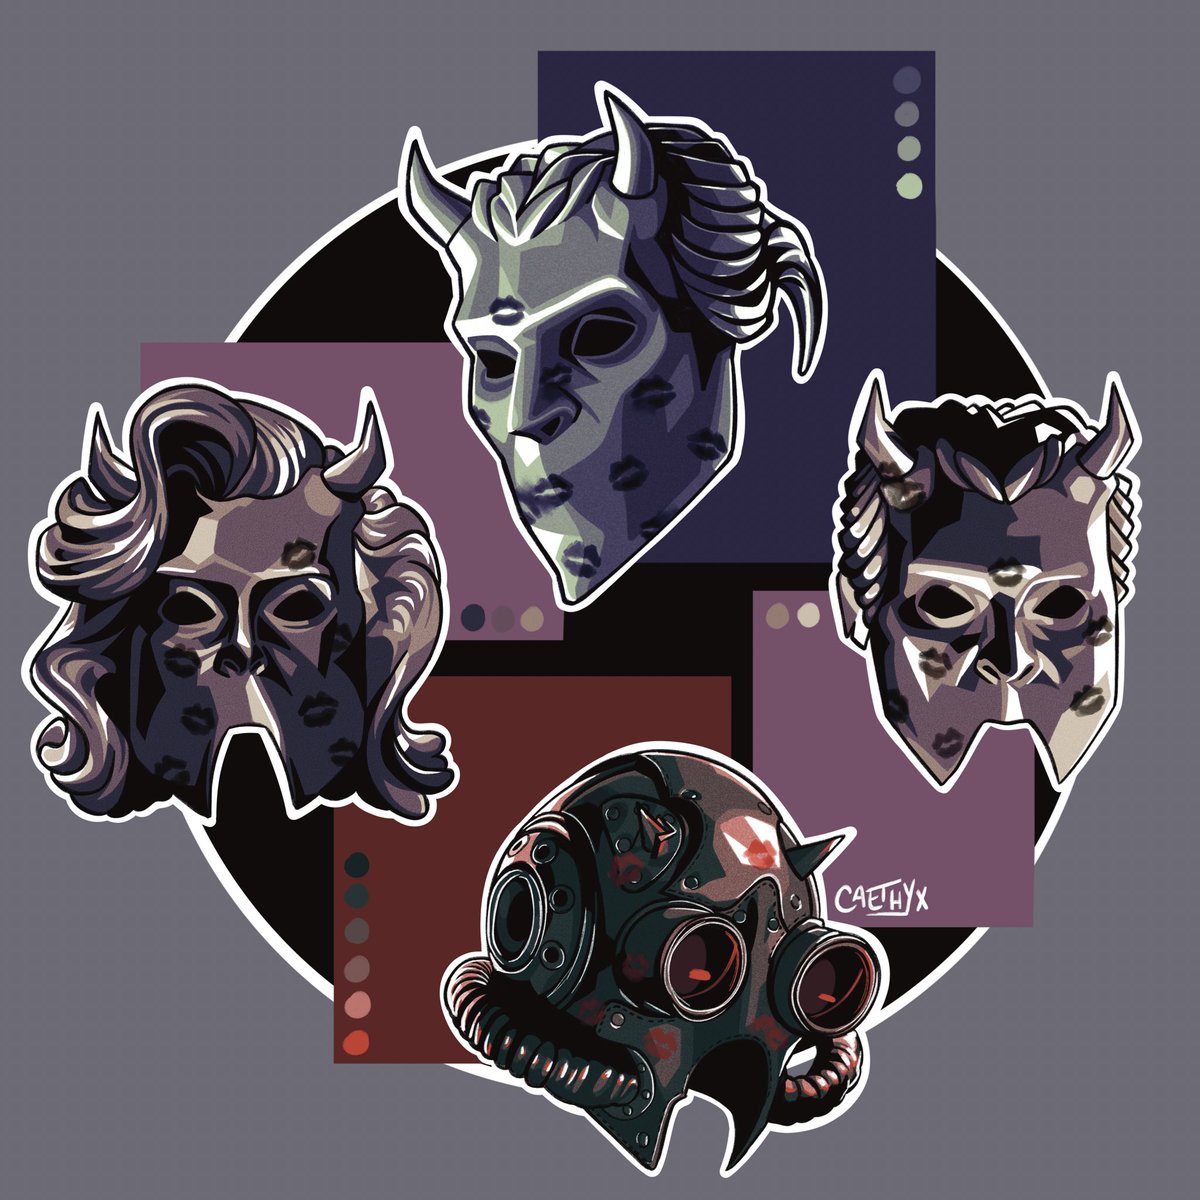 ghoul masks with kissies :3 #ghostband #GhostBandFanart #thebandghost #ghosttwt #namelessghoul